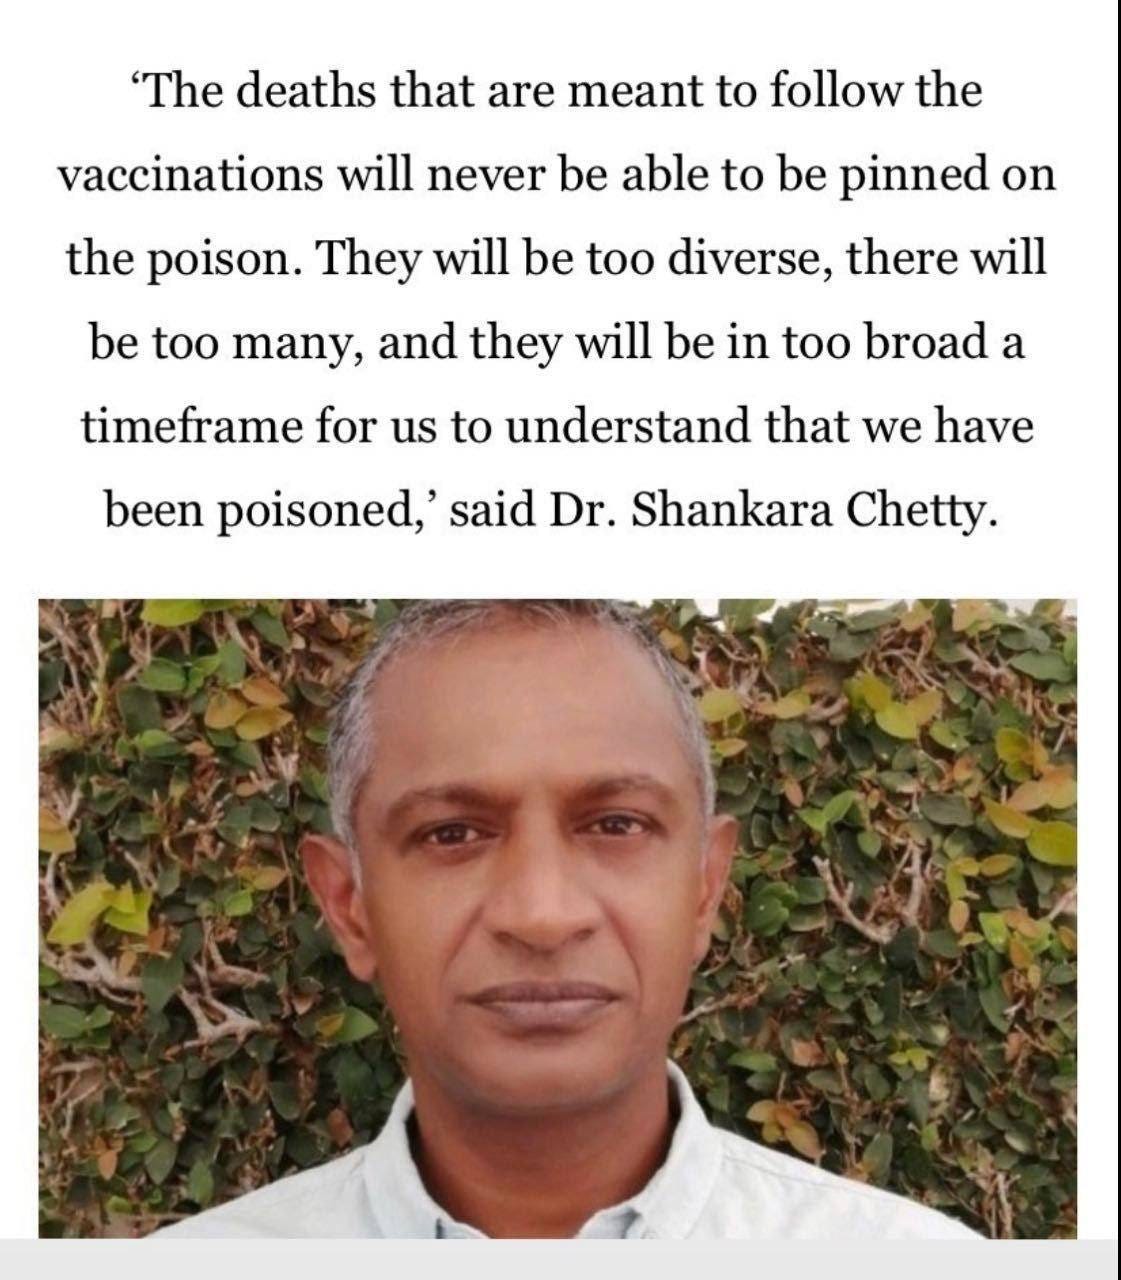 May be an image of 1 person and text that says "'The deaths that are meant to follow the vaccinations will never be able to be pinned on diverse, there will the poison. They will be too be too many, and they will be in too broad a timeframe for us to understand that we have been poisoned, said Dr. Shank Chetty."